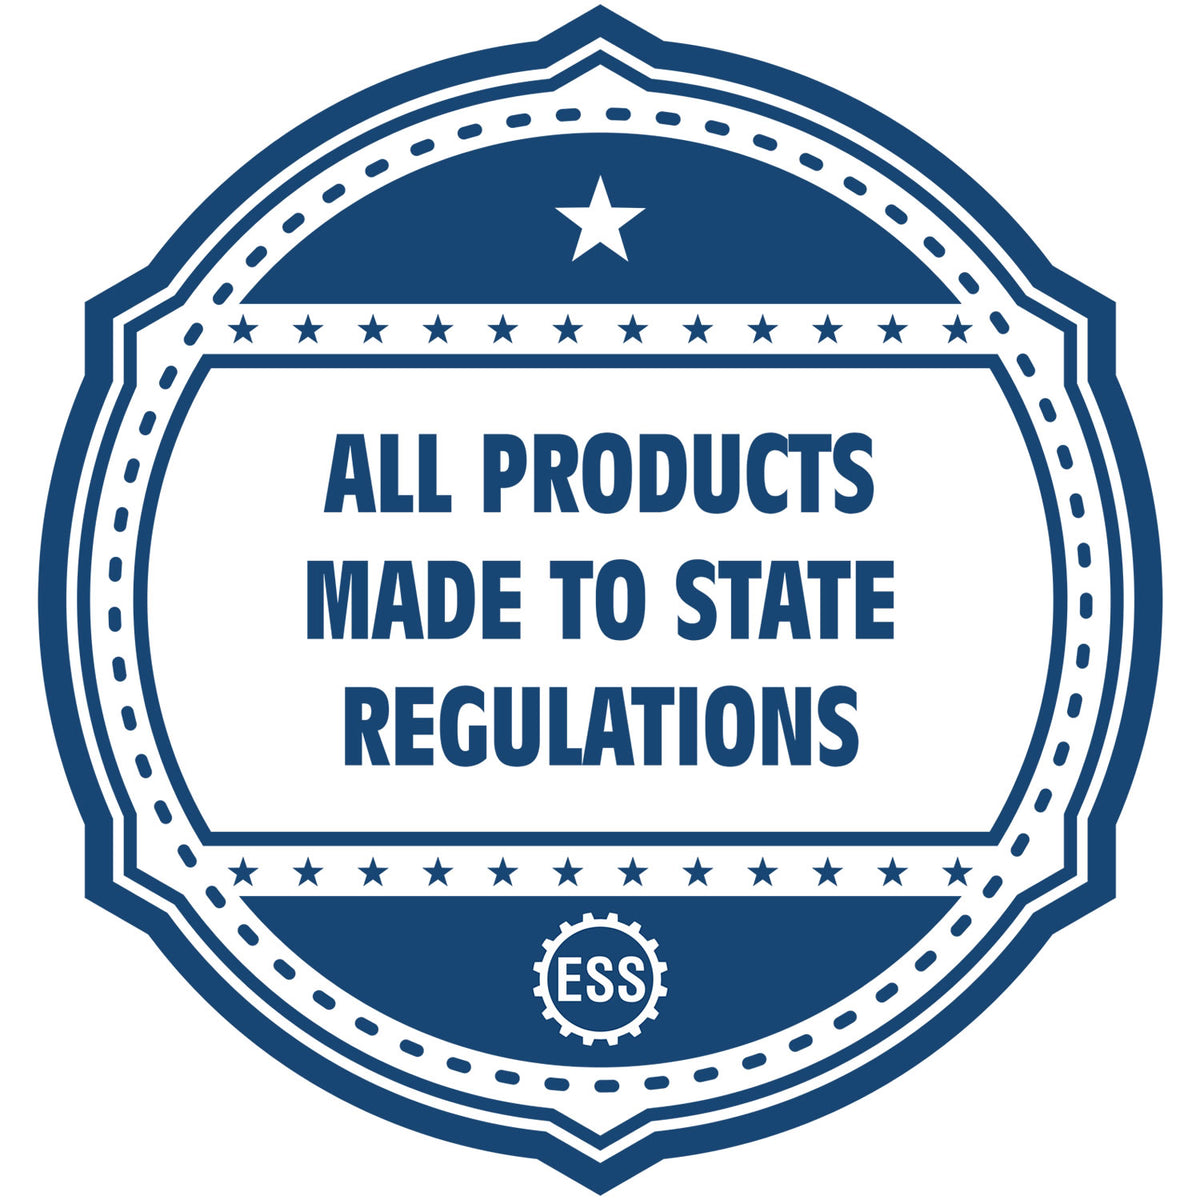 An icon or badge element for the Self-Inking State Seal New Hampshire Notary Stamp showing that this product is made in compliance with state regulations.